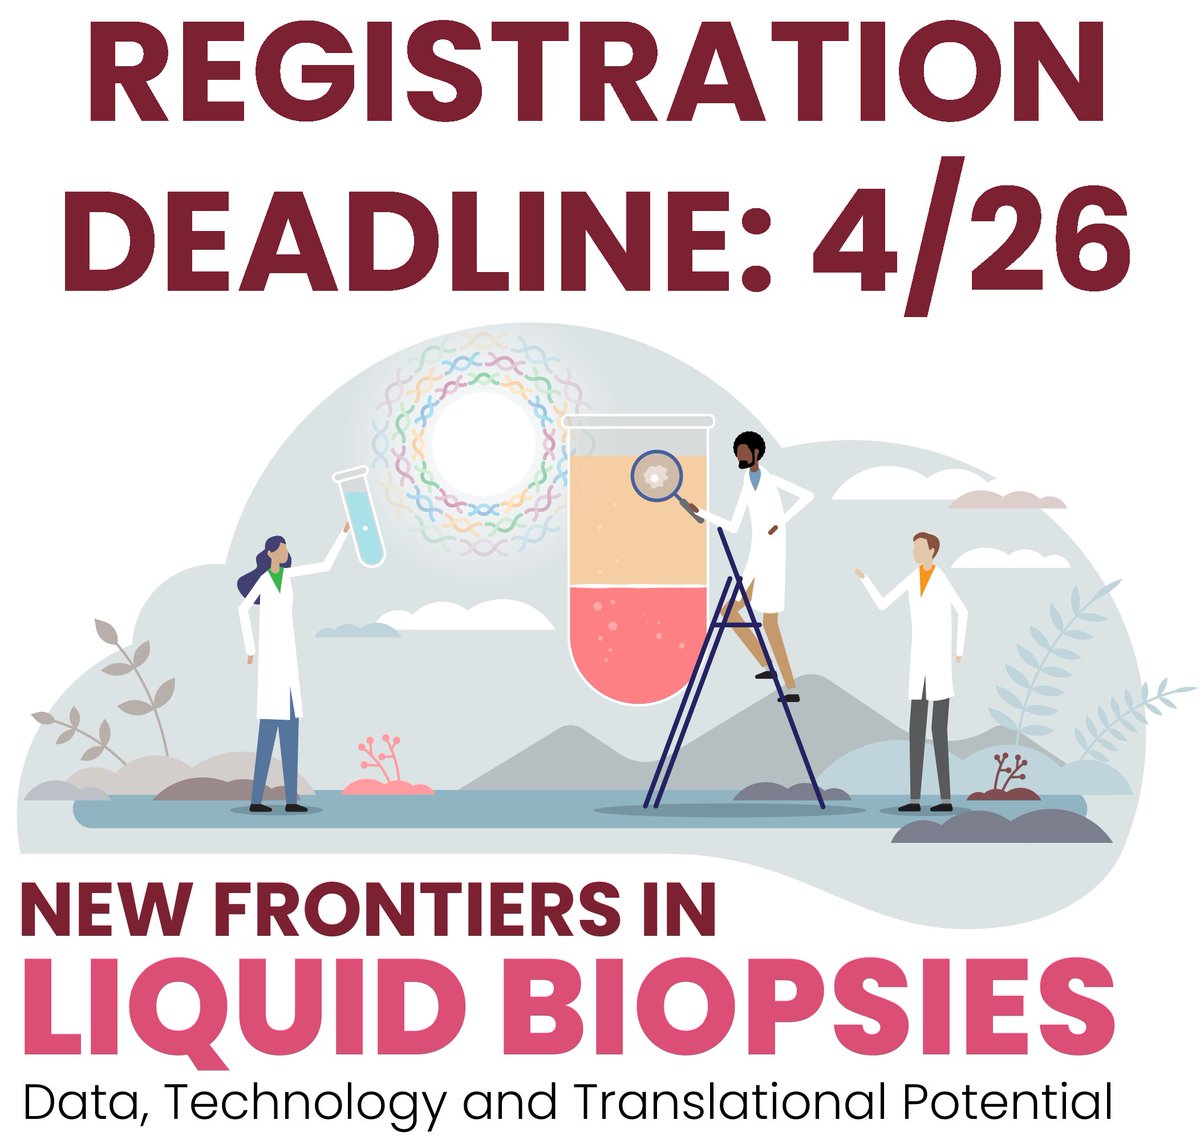 Think the #liquidbiopsy field is limited to plasma #ctDNA? WRONG! It also includes CSF, sweat, saliva, tears & urine--carrying proteins, polysaccharides, metabolites, RNA and EVs. Hear about all of these at the free @NIH #liqbx meeting. Signup ends 4/26: ncifrederick.cancer.gov/events/confere…